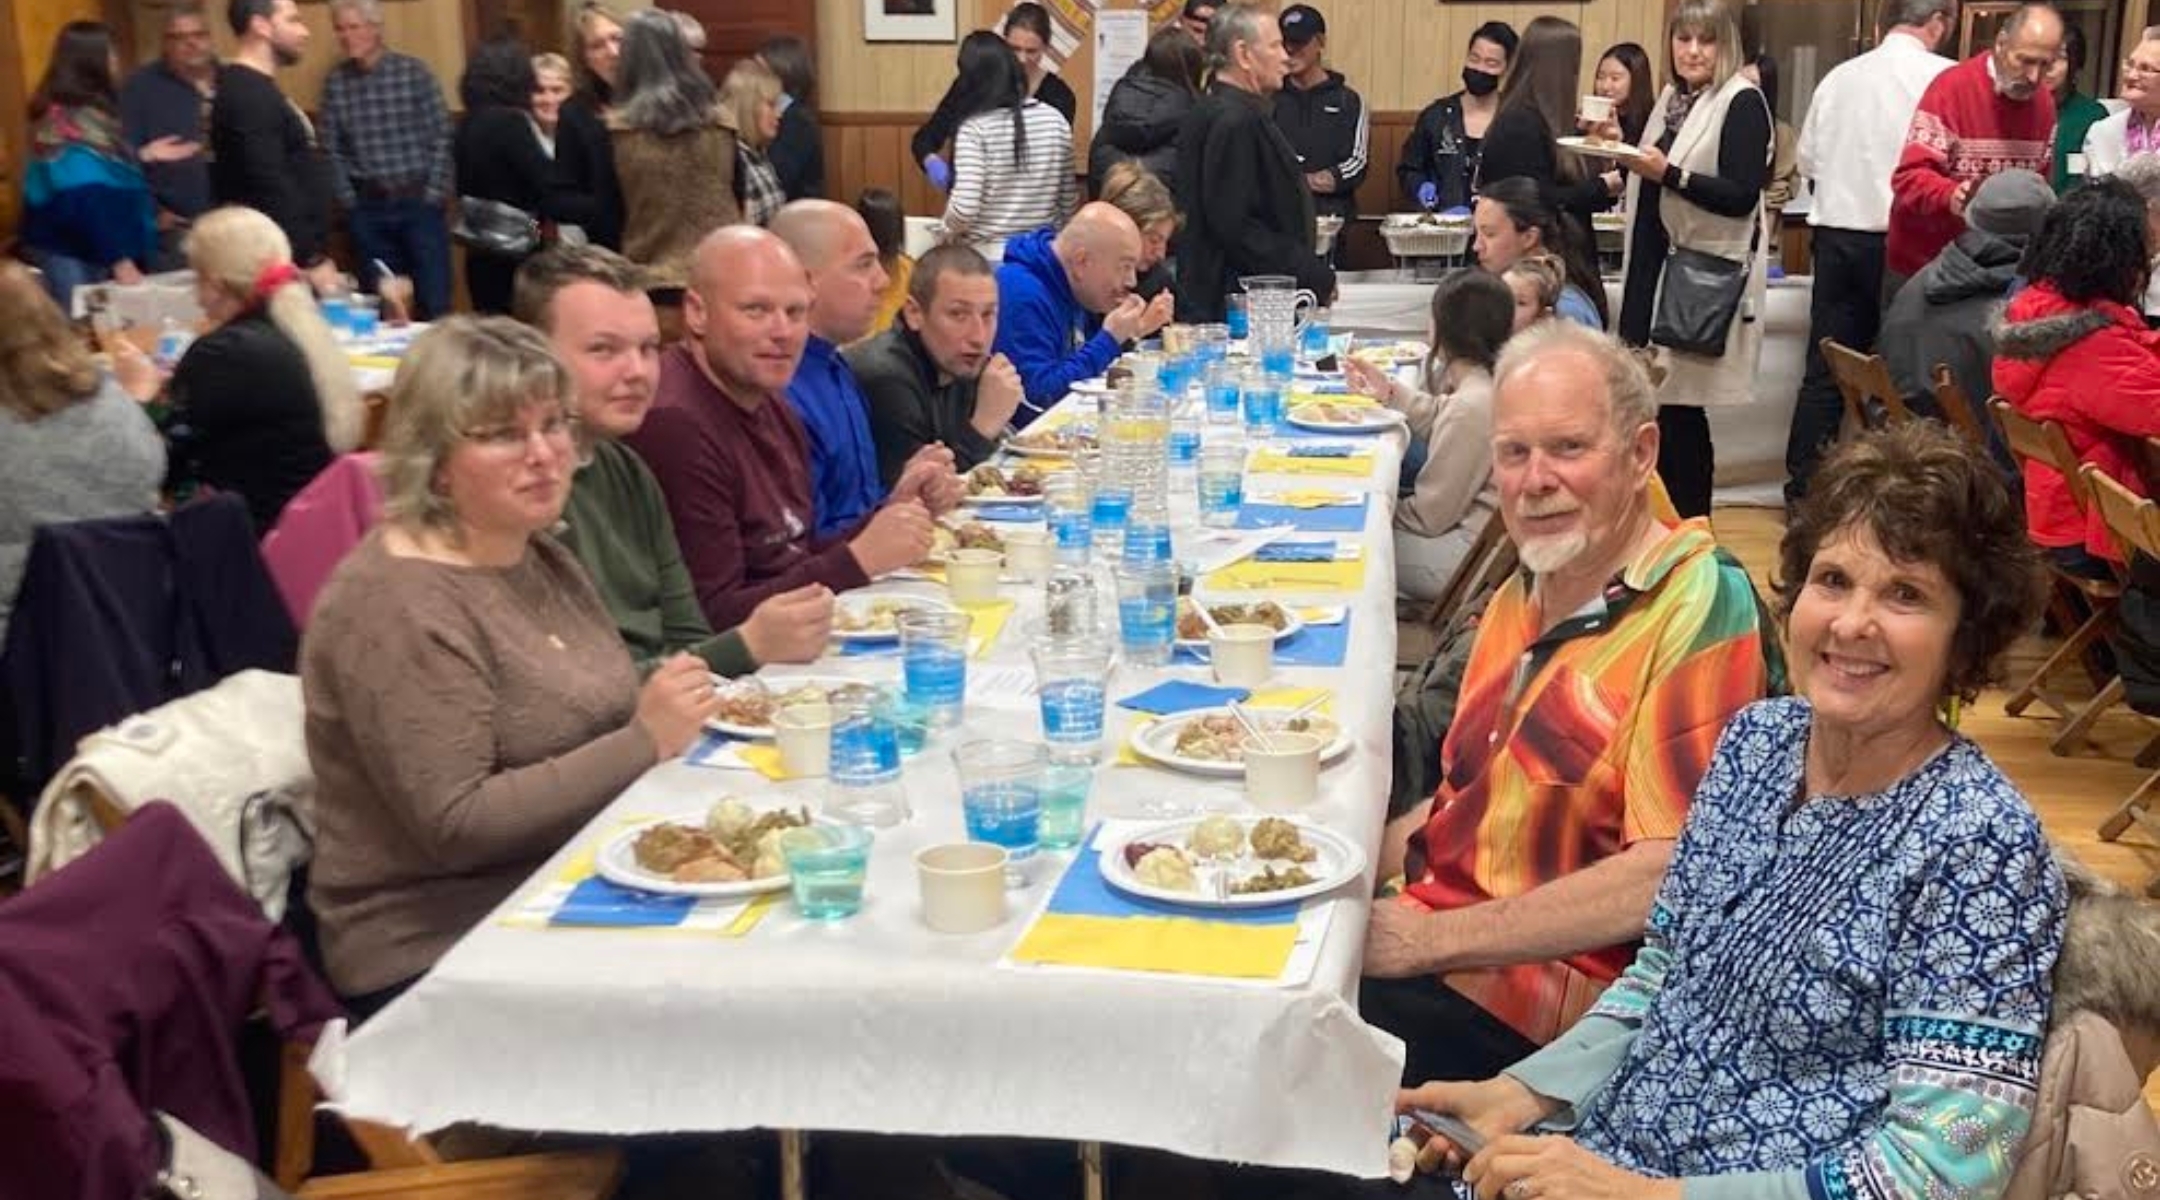 Ukrainian evacuees celebrate a pre-Thanksgiving meal at the Ukrainian American Civic Center in Buffalo, New York. (Courtesy of Jewish Federations of North America)